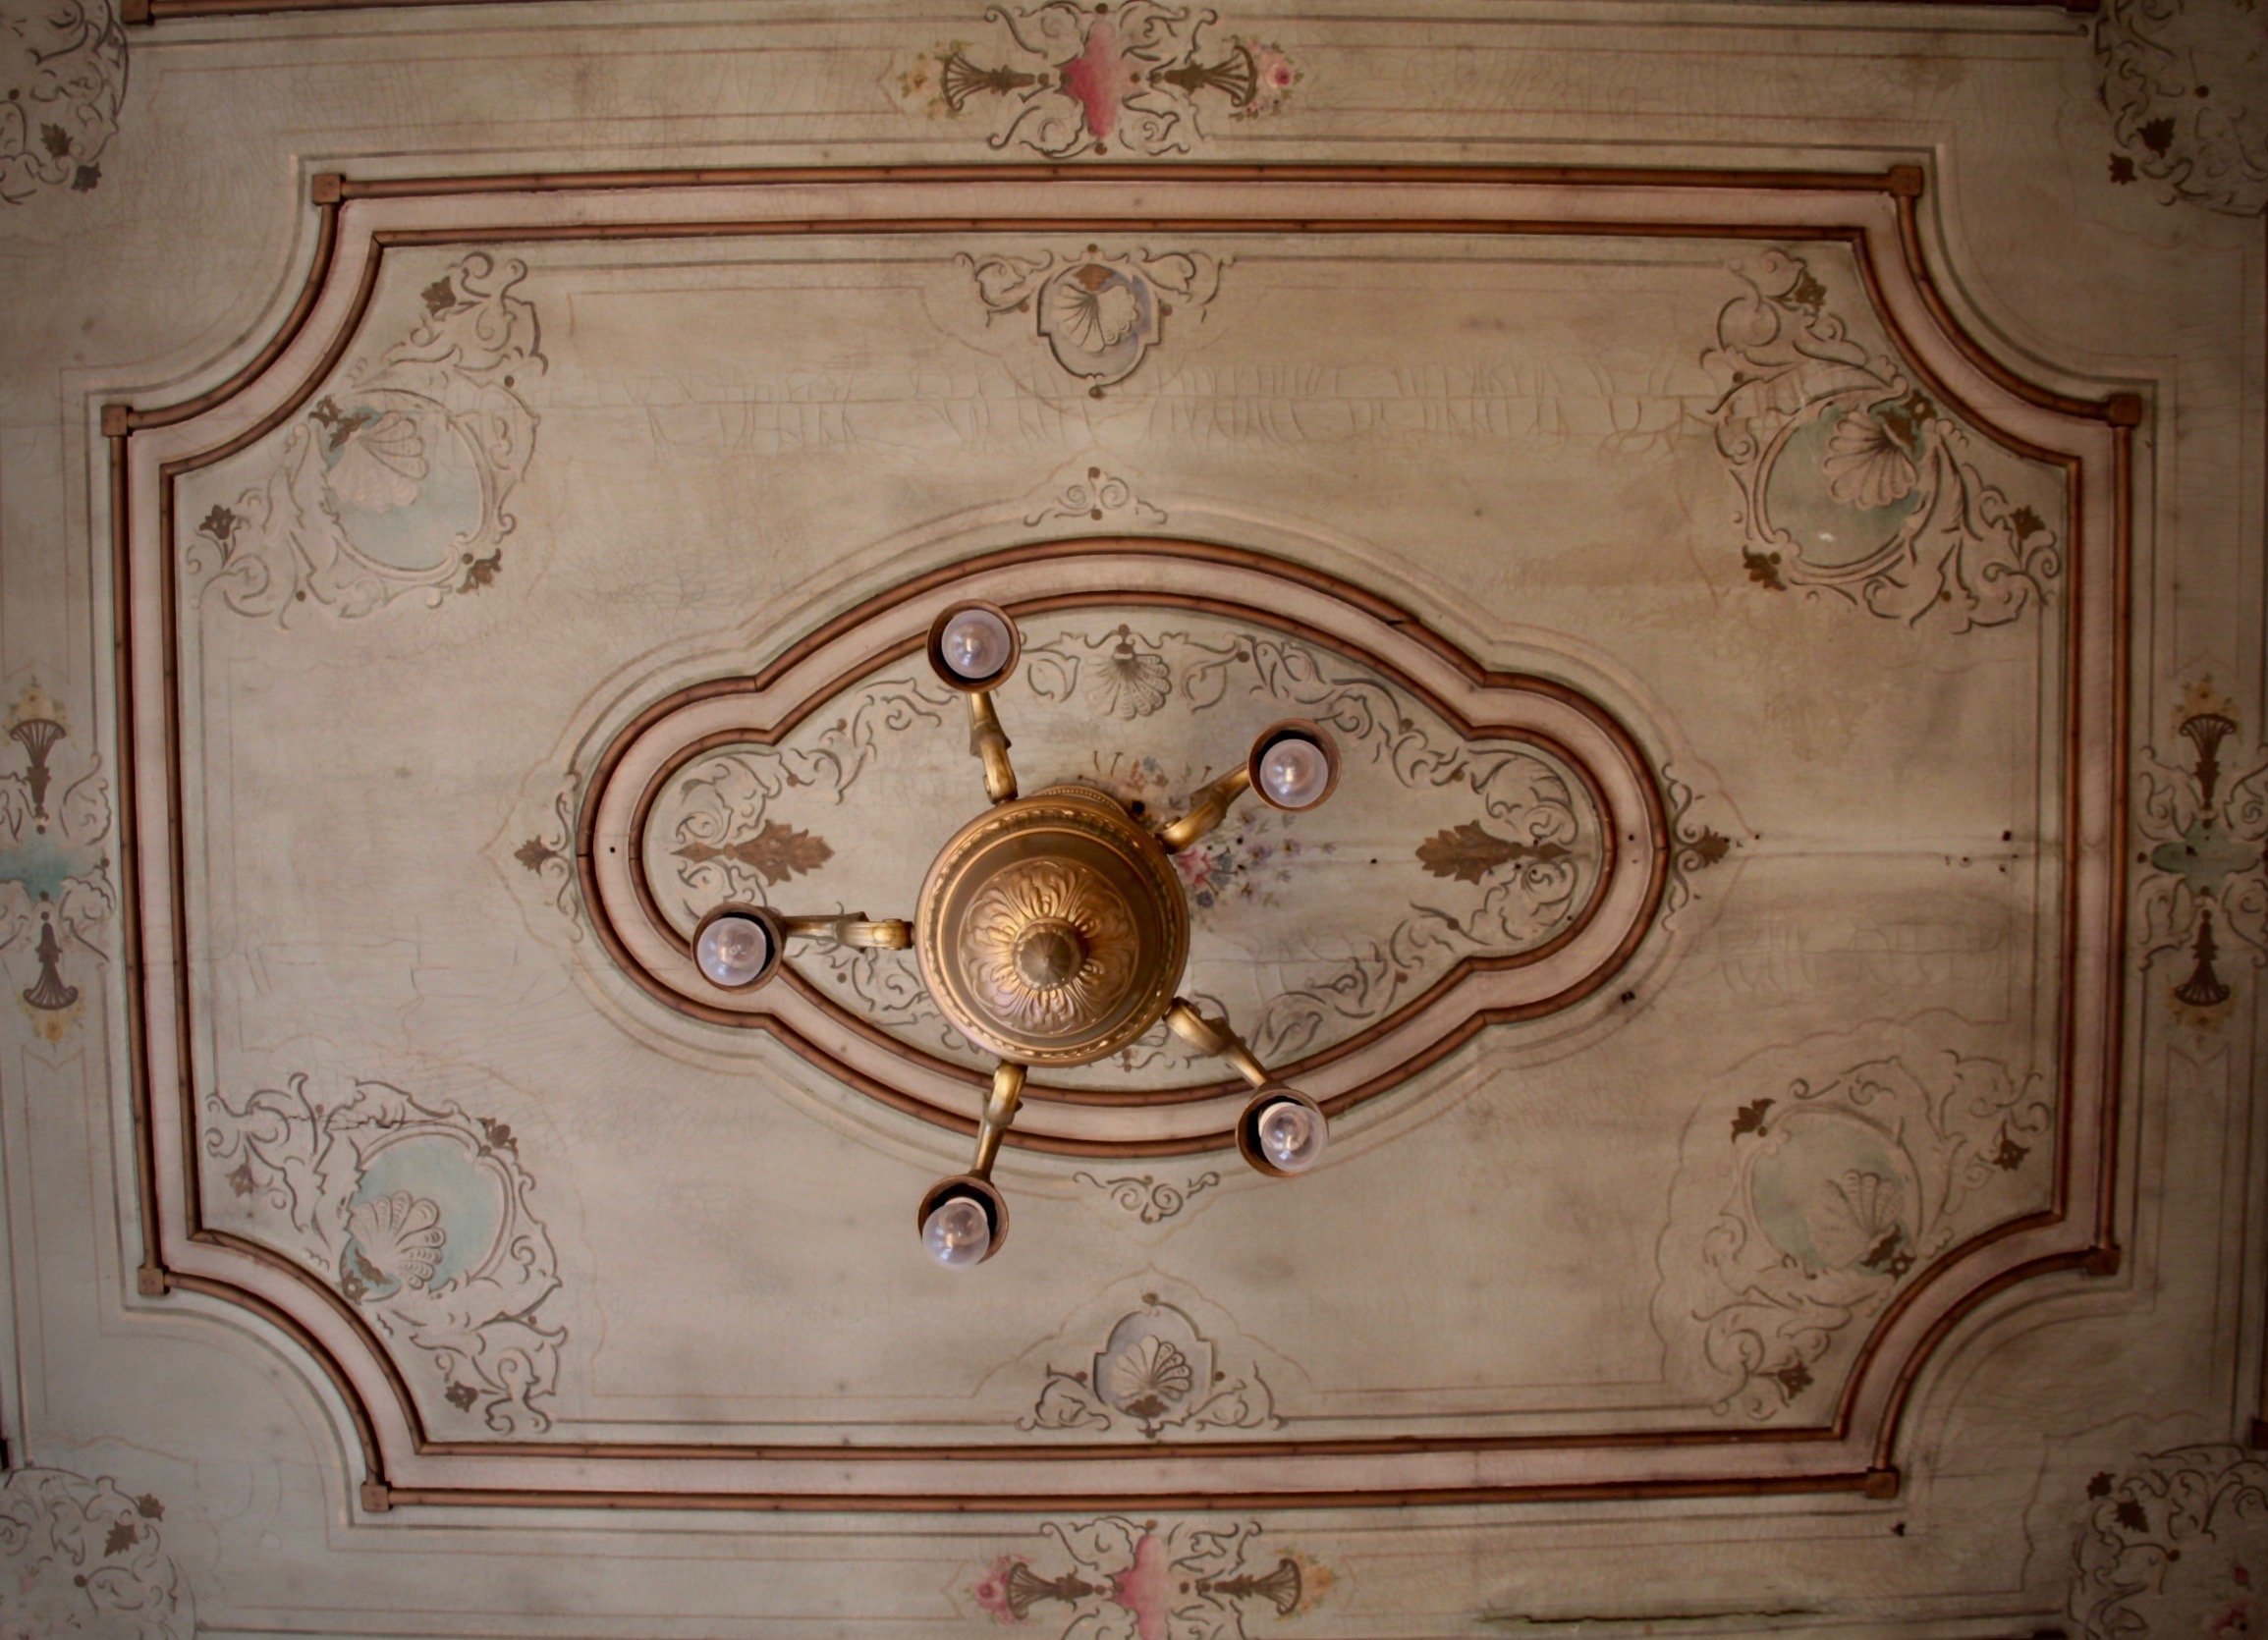 Ceiling decorations at the mansion are fascinating. (AA Photo)